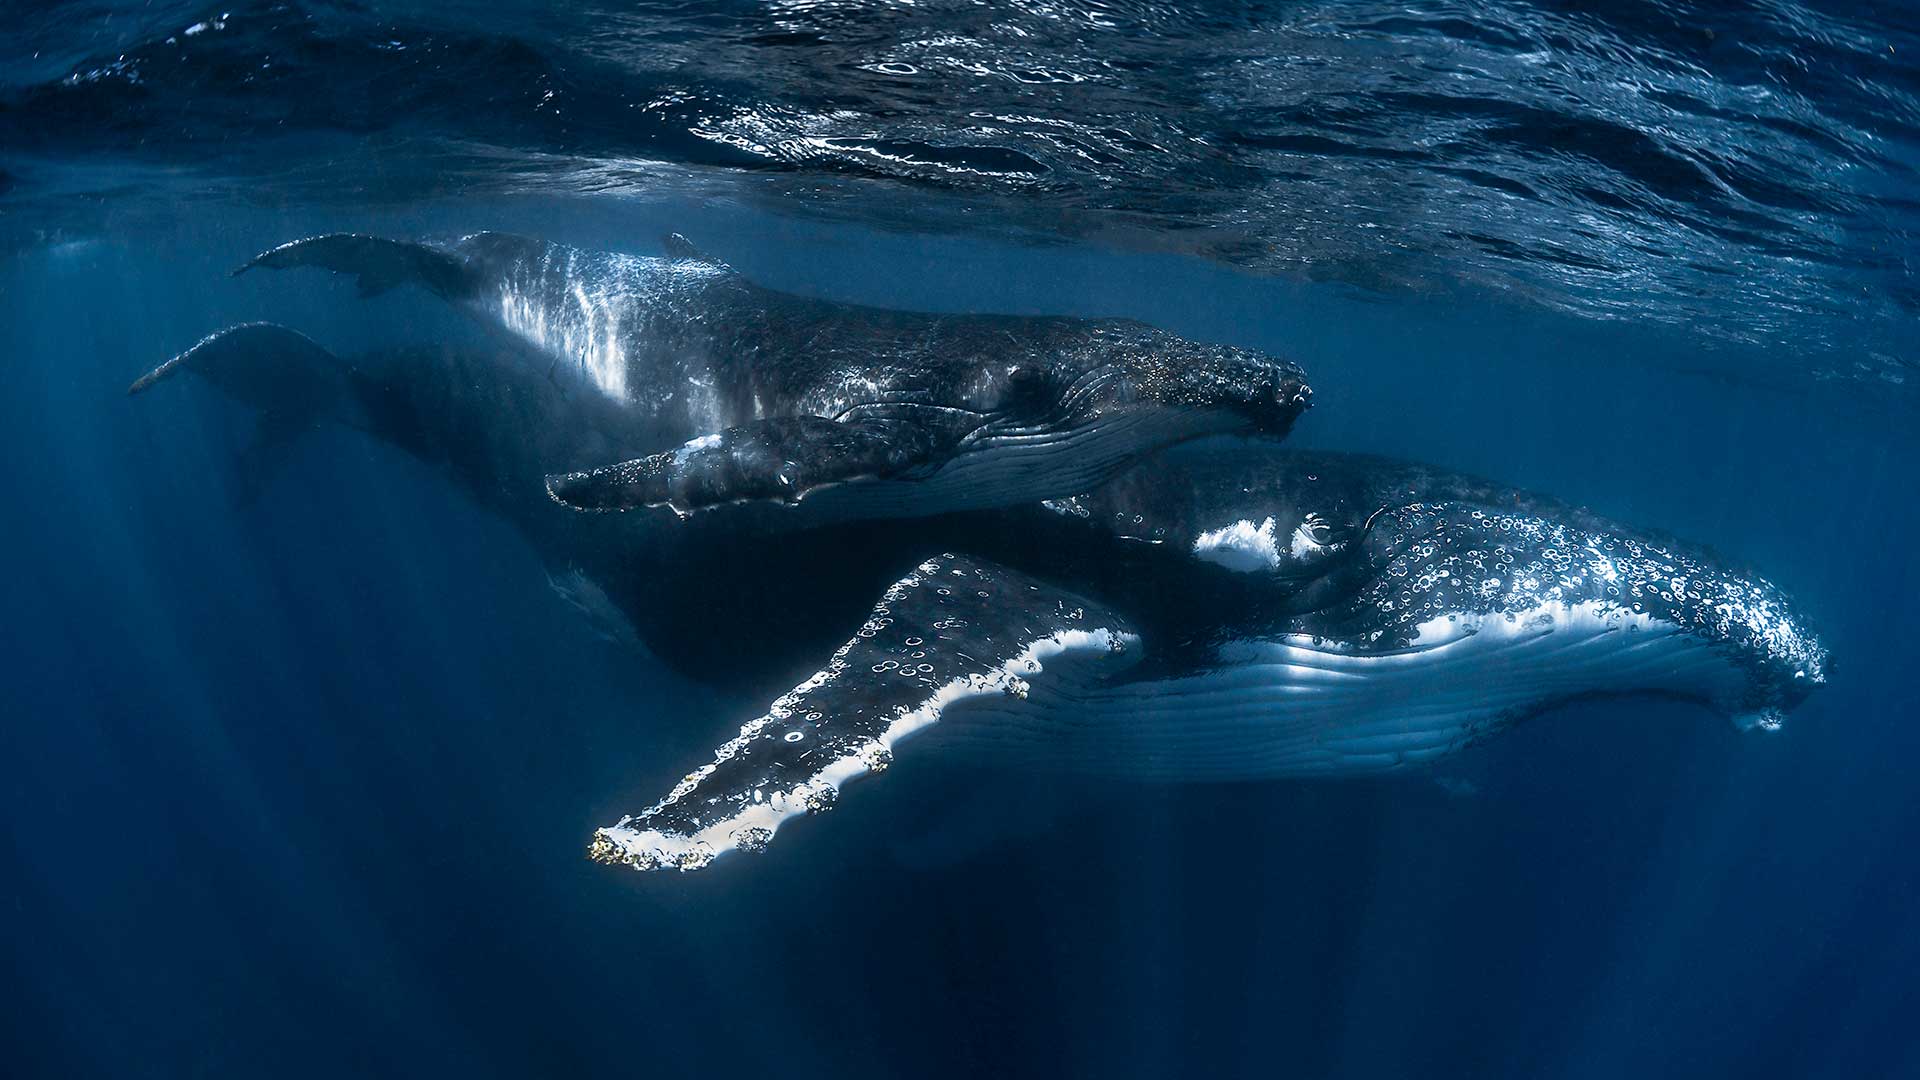 A Humpback Whale (Megaptera novaeangliae) Mother and Calf swim near Ningaloo Reef, Australia. The Western Australian coastline is a migration route for the Western Australian humpback whale population. Humpback whales undertake a consistent annual migration from high latitude Antarctic feeding grounds to low latitude breeding grounds.